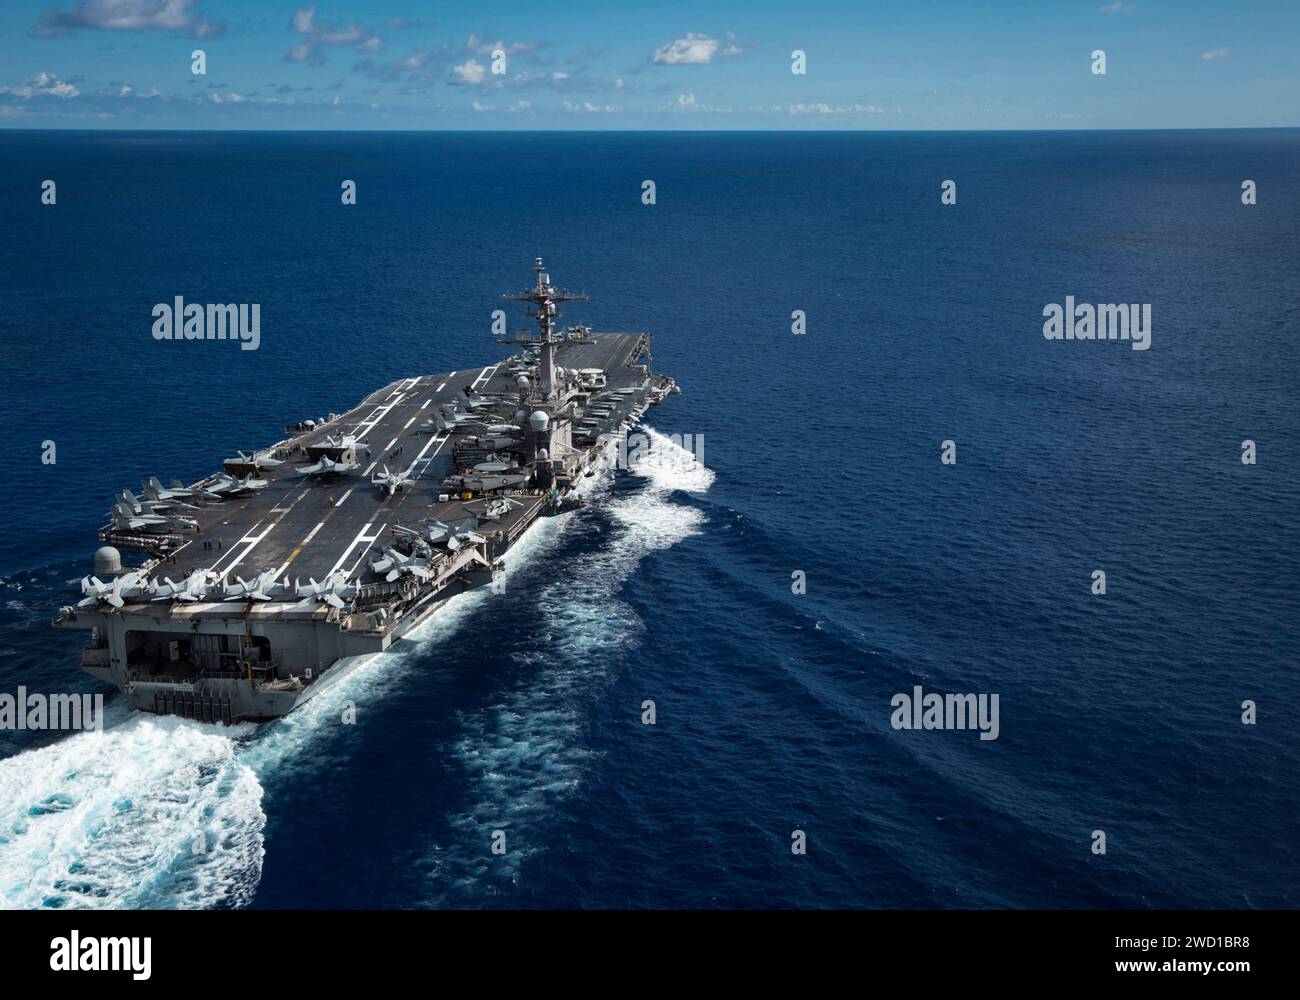 The Nimitz-class aircraft carrier USS Carl Vinson transits the Philippine Sea. Stock Photo